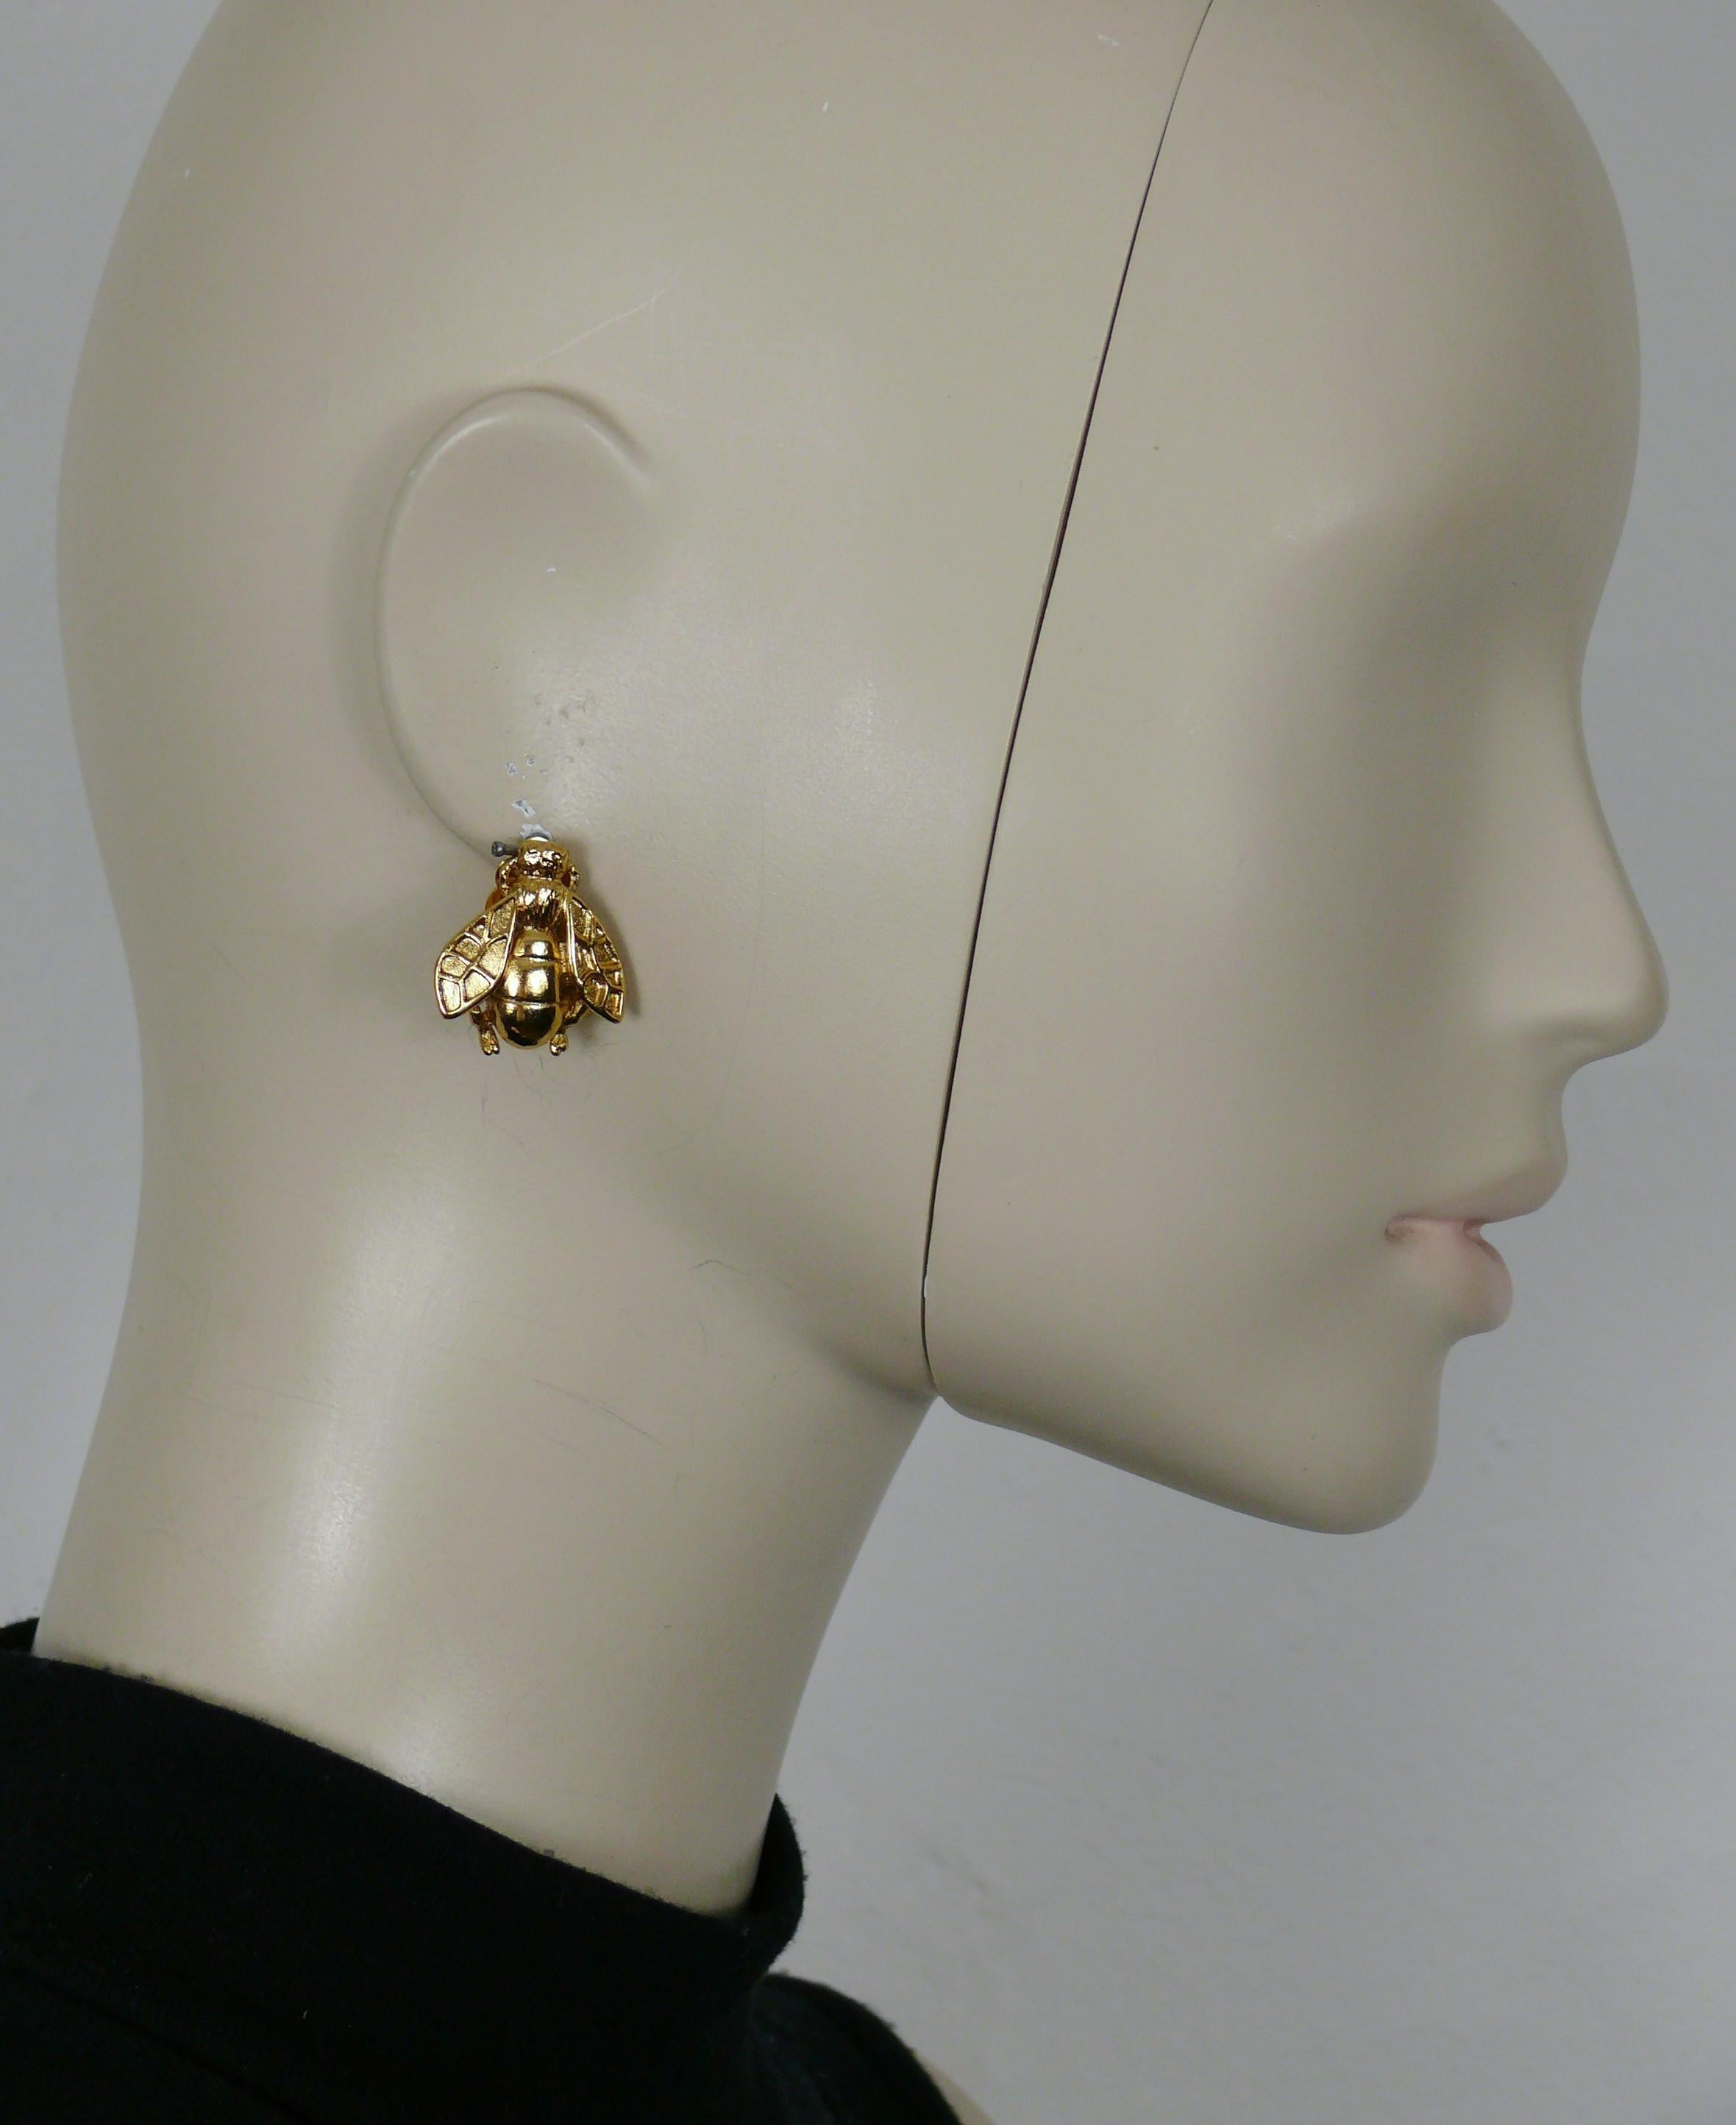 CHRISTIAN DIOR Boutique Iconic Bee Brooch and Clip-On Earrings (unmarked) For Sale 3